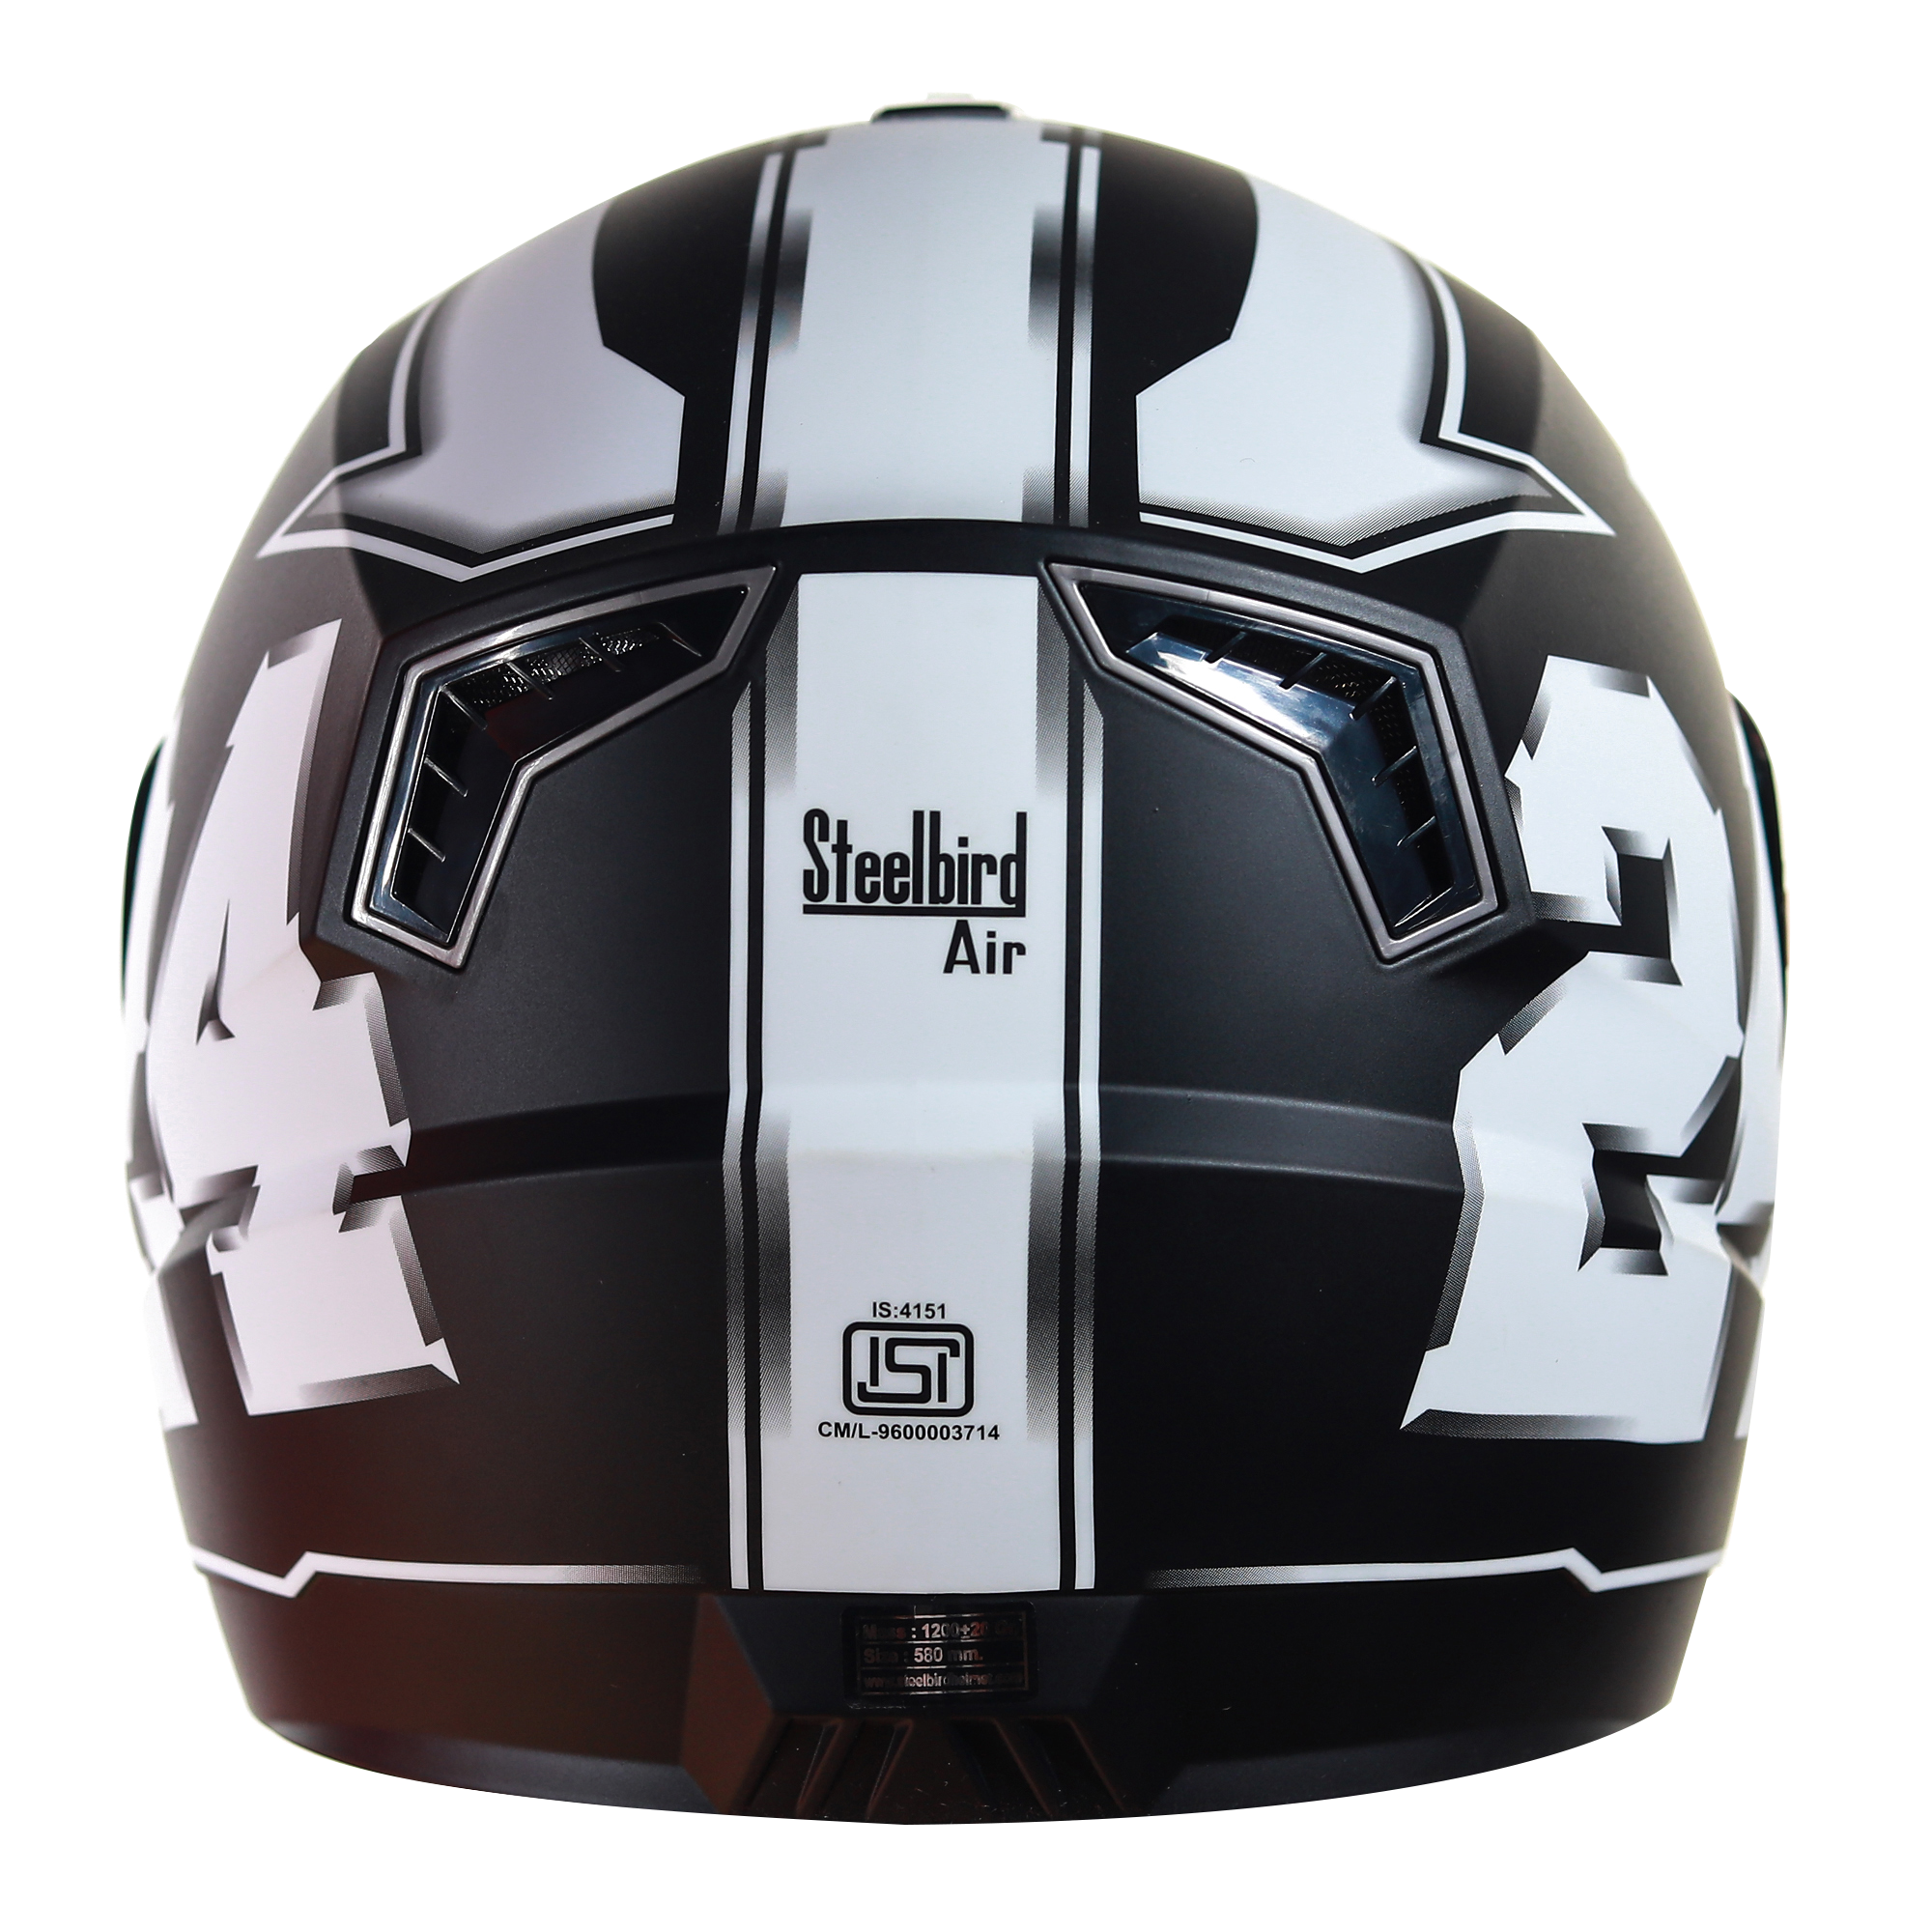 SBA-1 3D Design Mat Black With White And White ( Fitted With Clear Visor  Extra Smoke Visor Free)